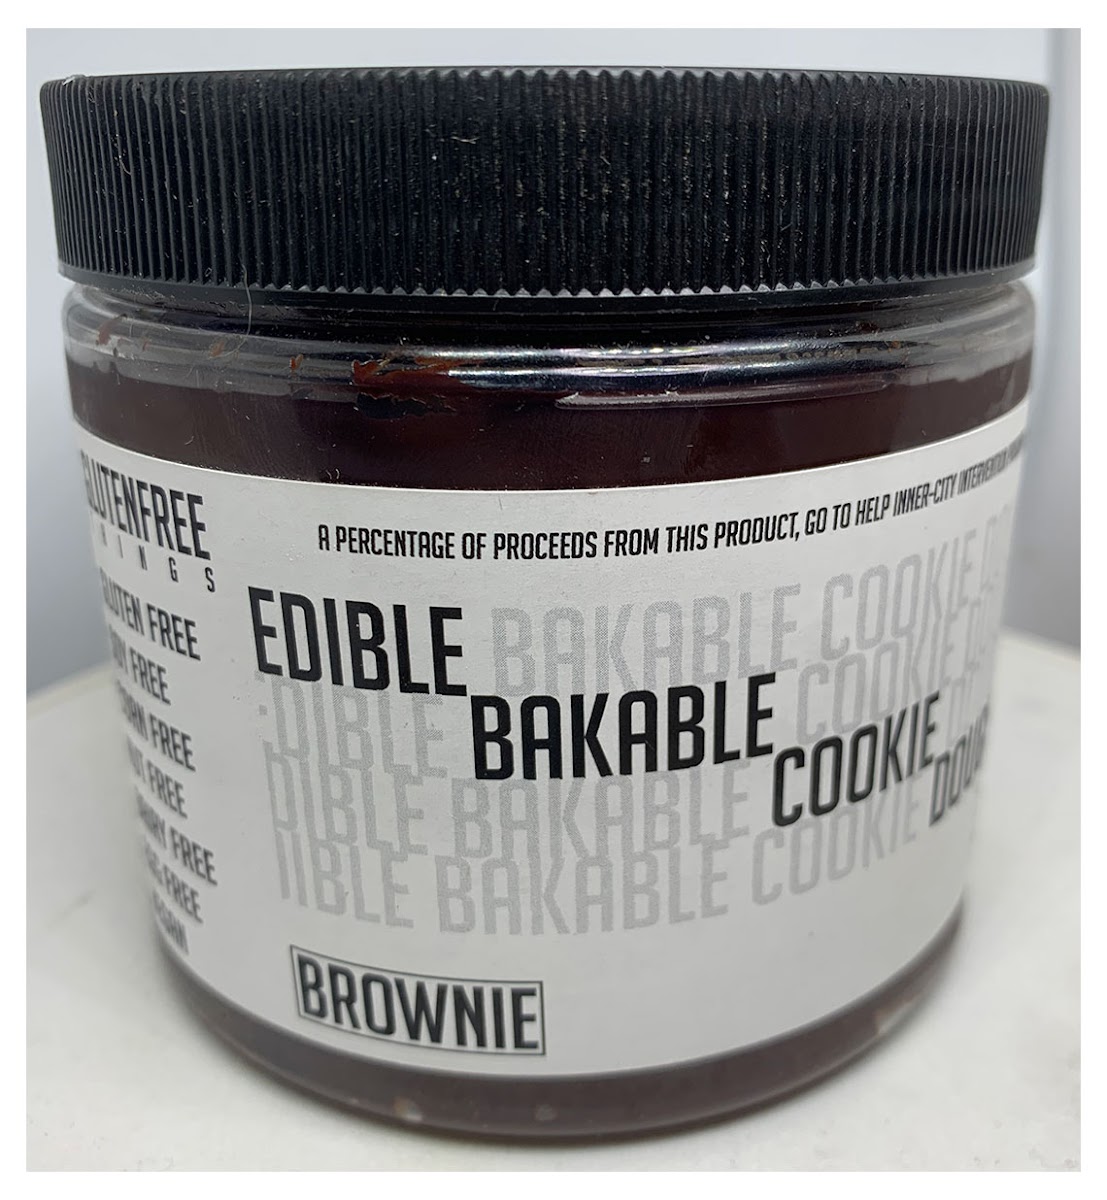 New easy scoop packaging for our incredible EDIBLE bakeable COOKIE DOUGH in BROWNIE flavor. Free from: gluten, dairy, eggs, soy, corn and nuts.